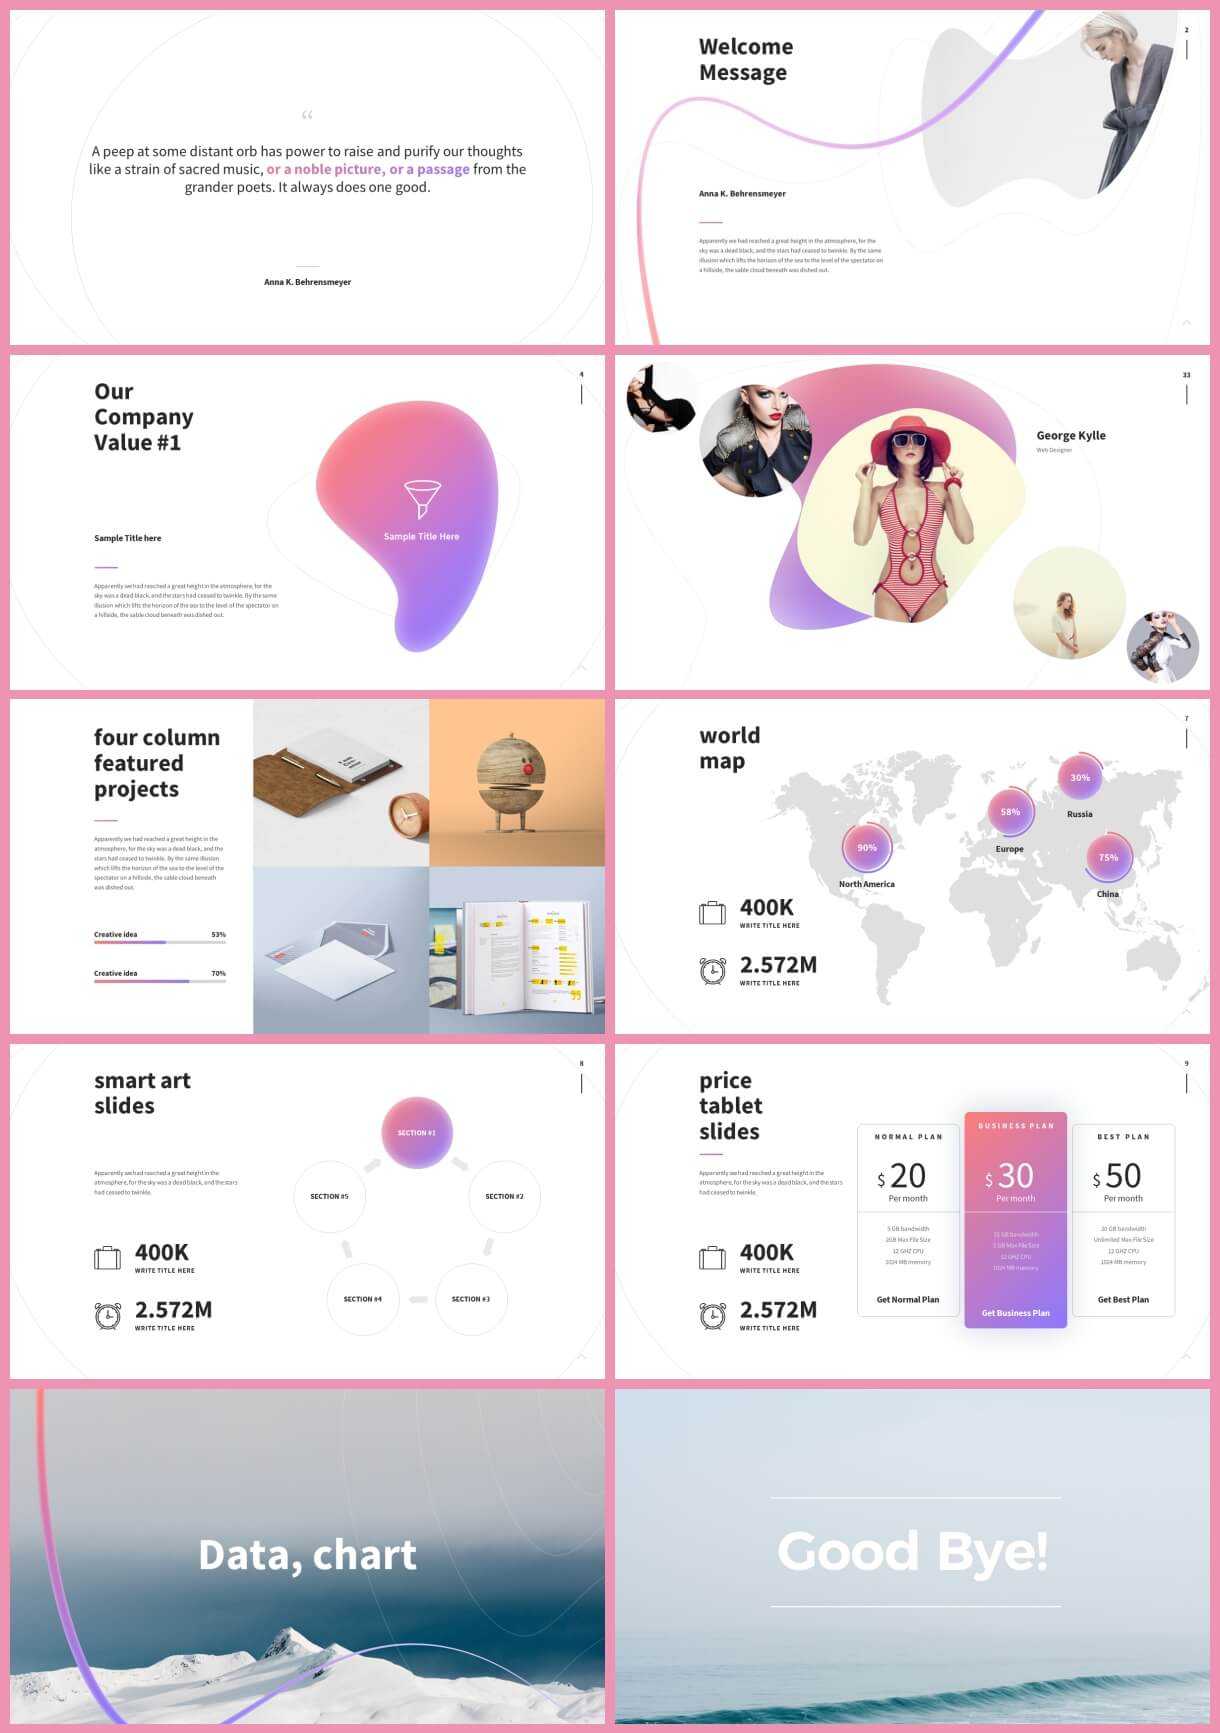 Free Shaper Creative Powerpoint Template (10 Slides) – Just Intended For Price Is Right Powerpoint Template